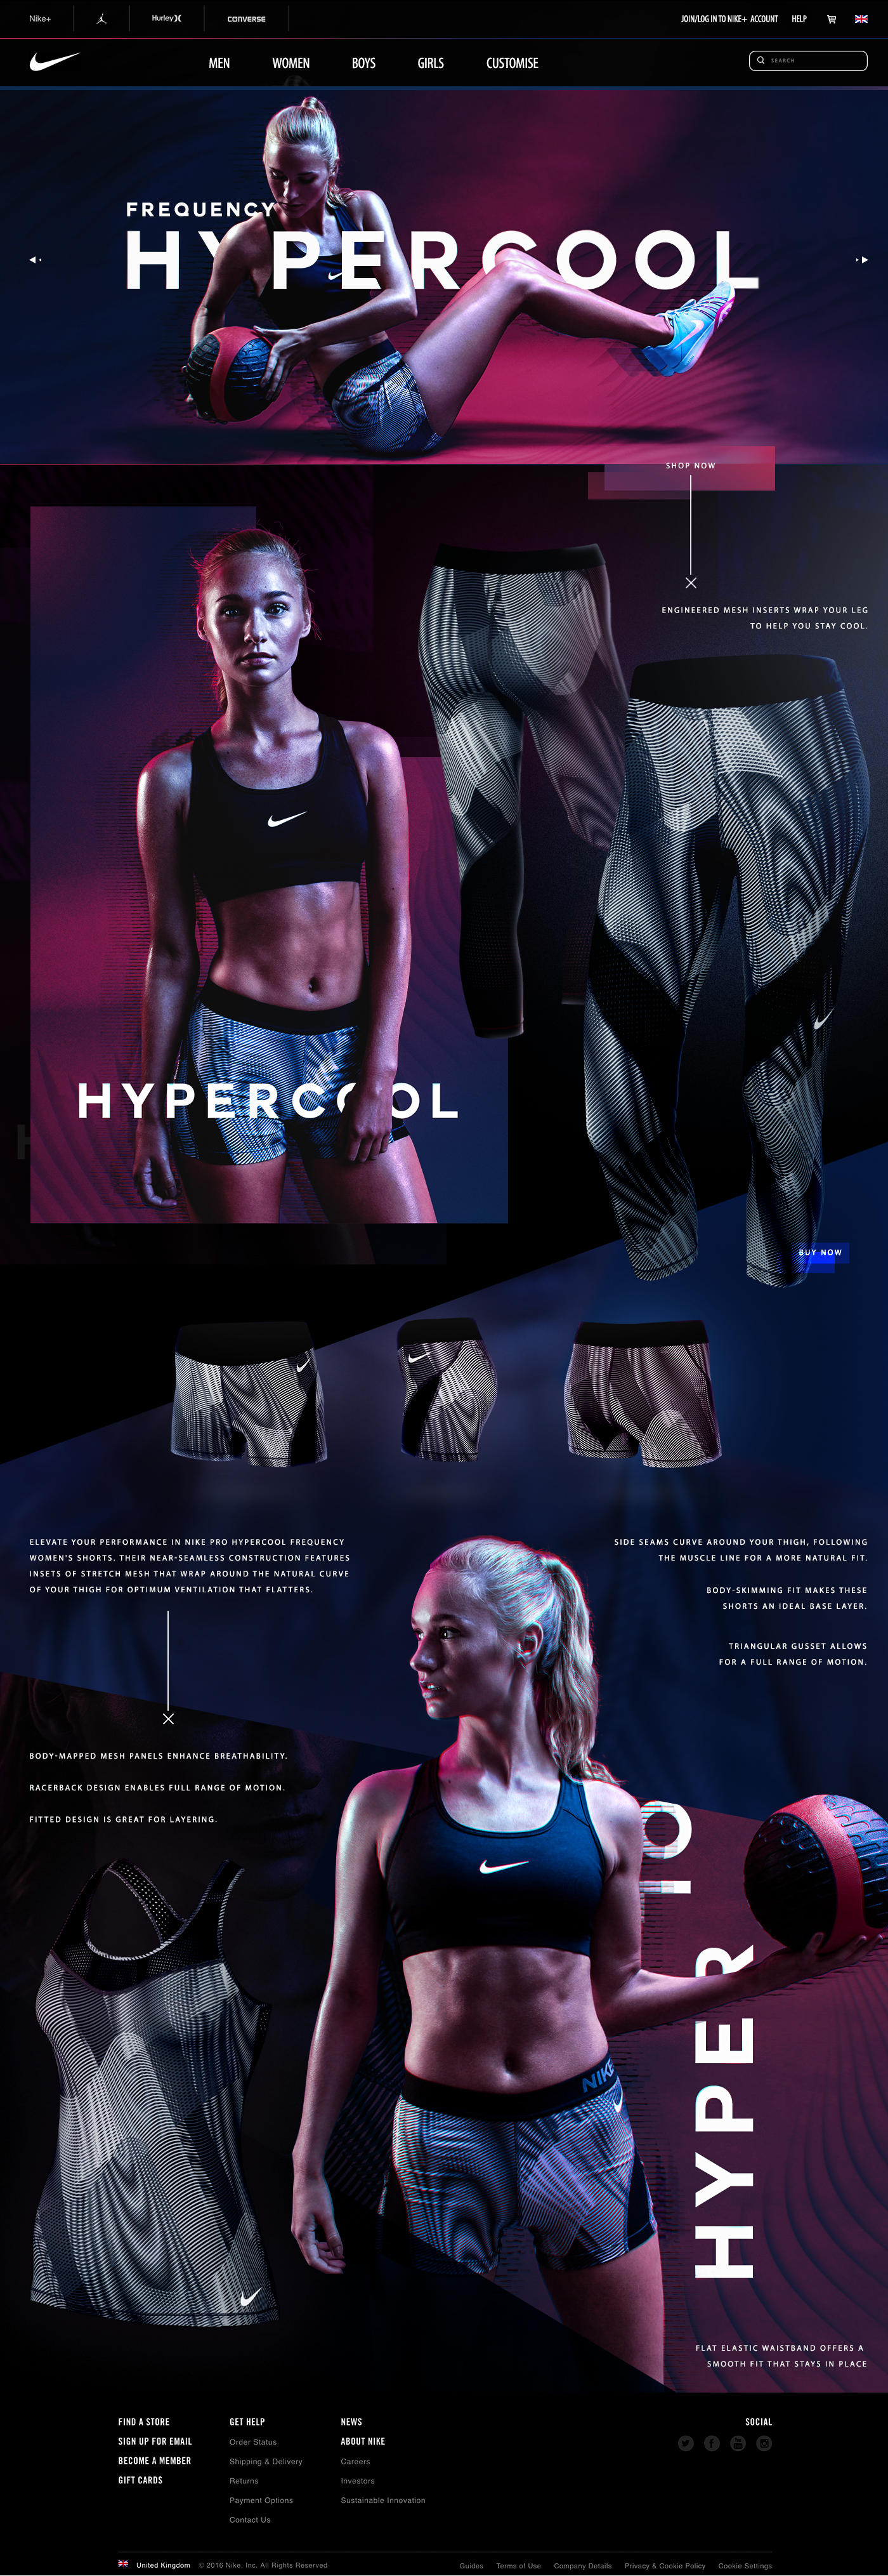 Nike 'HYPERCOOL Frequency' Campaign - Summer 2016 Behance